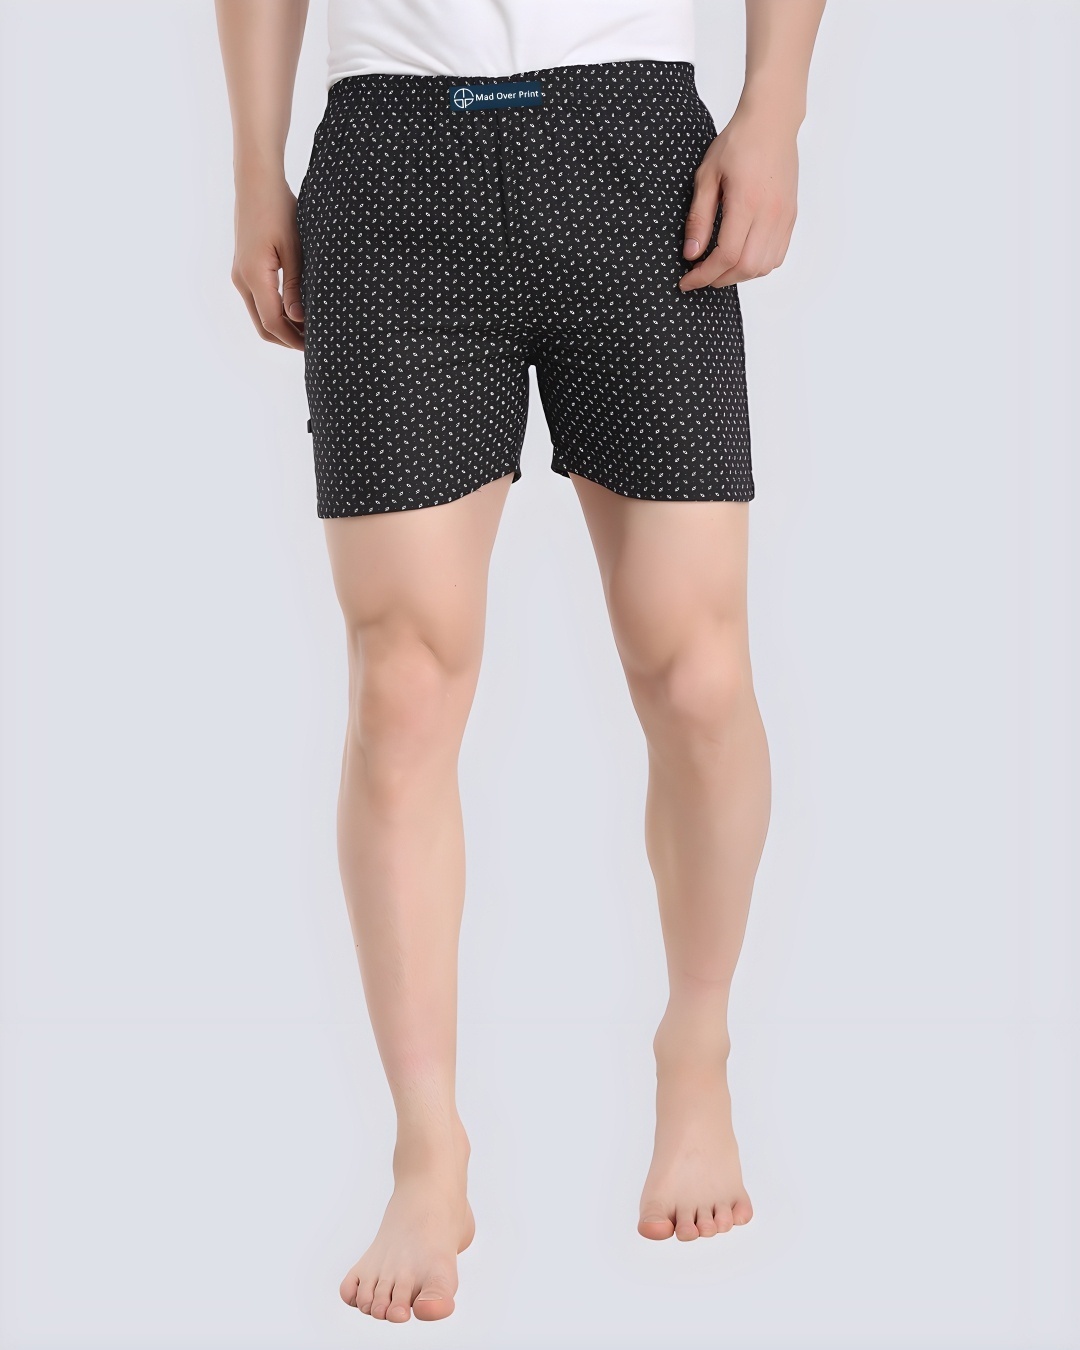 Shop Men's Black & White All Over Printed Cotton Boxers (Pack of 2)-Full